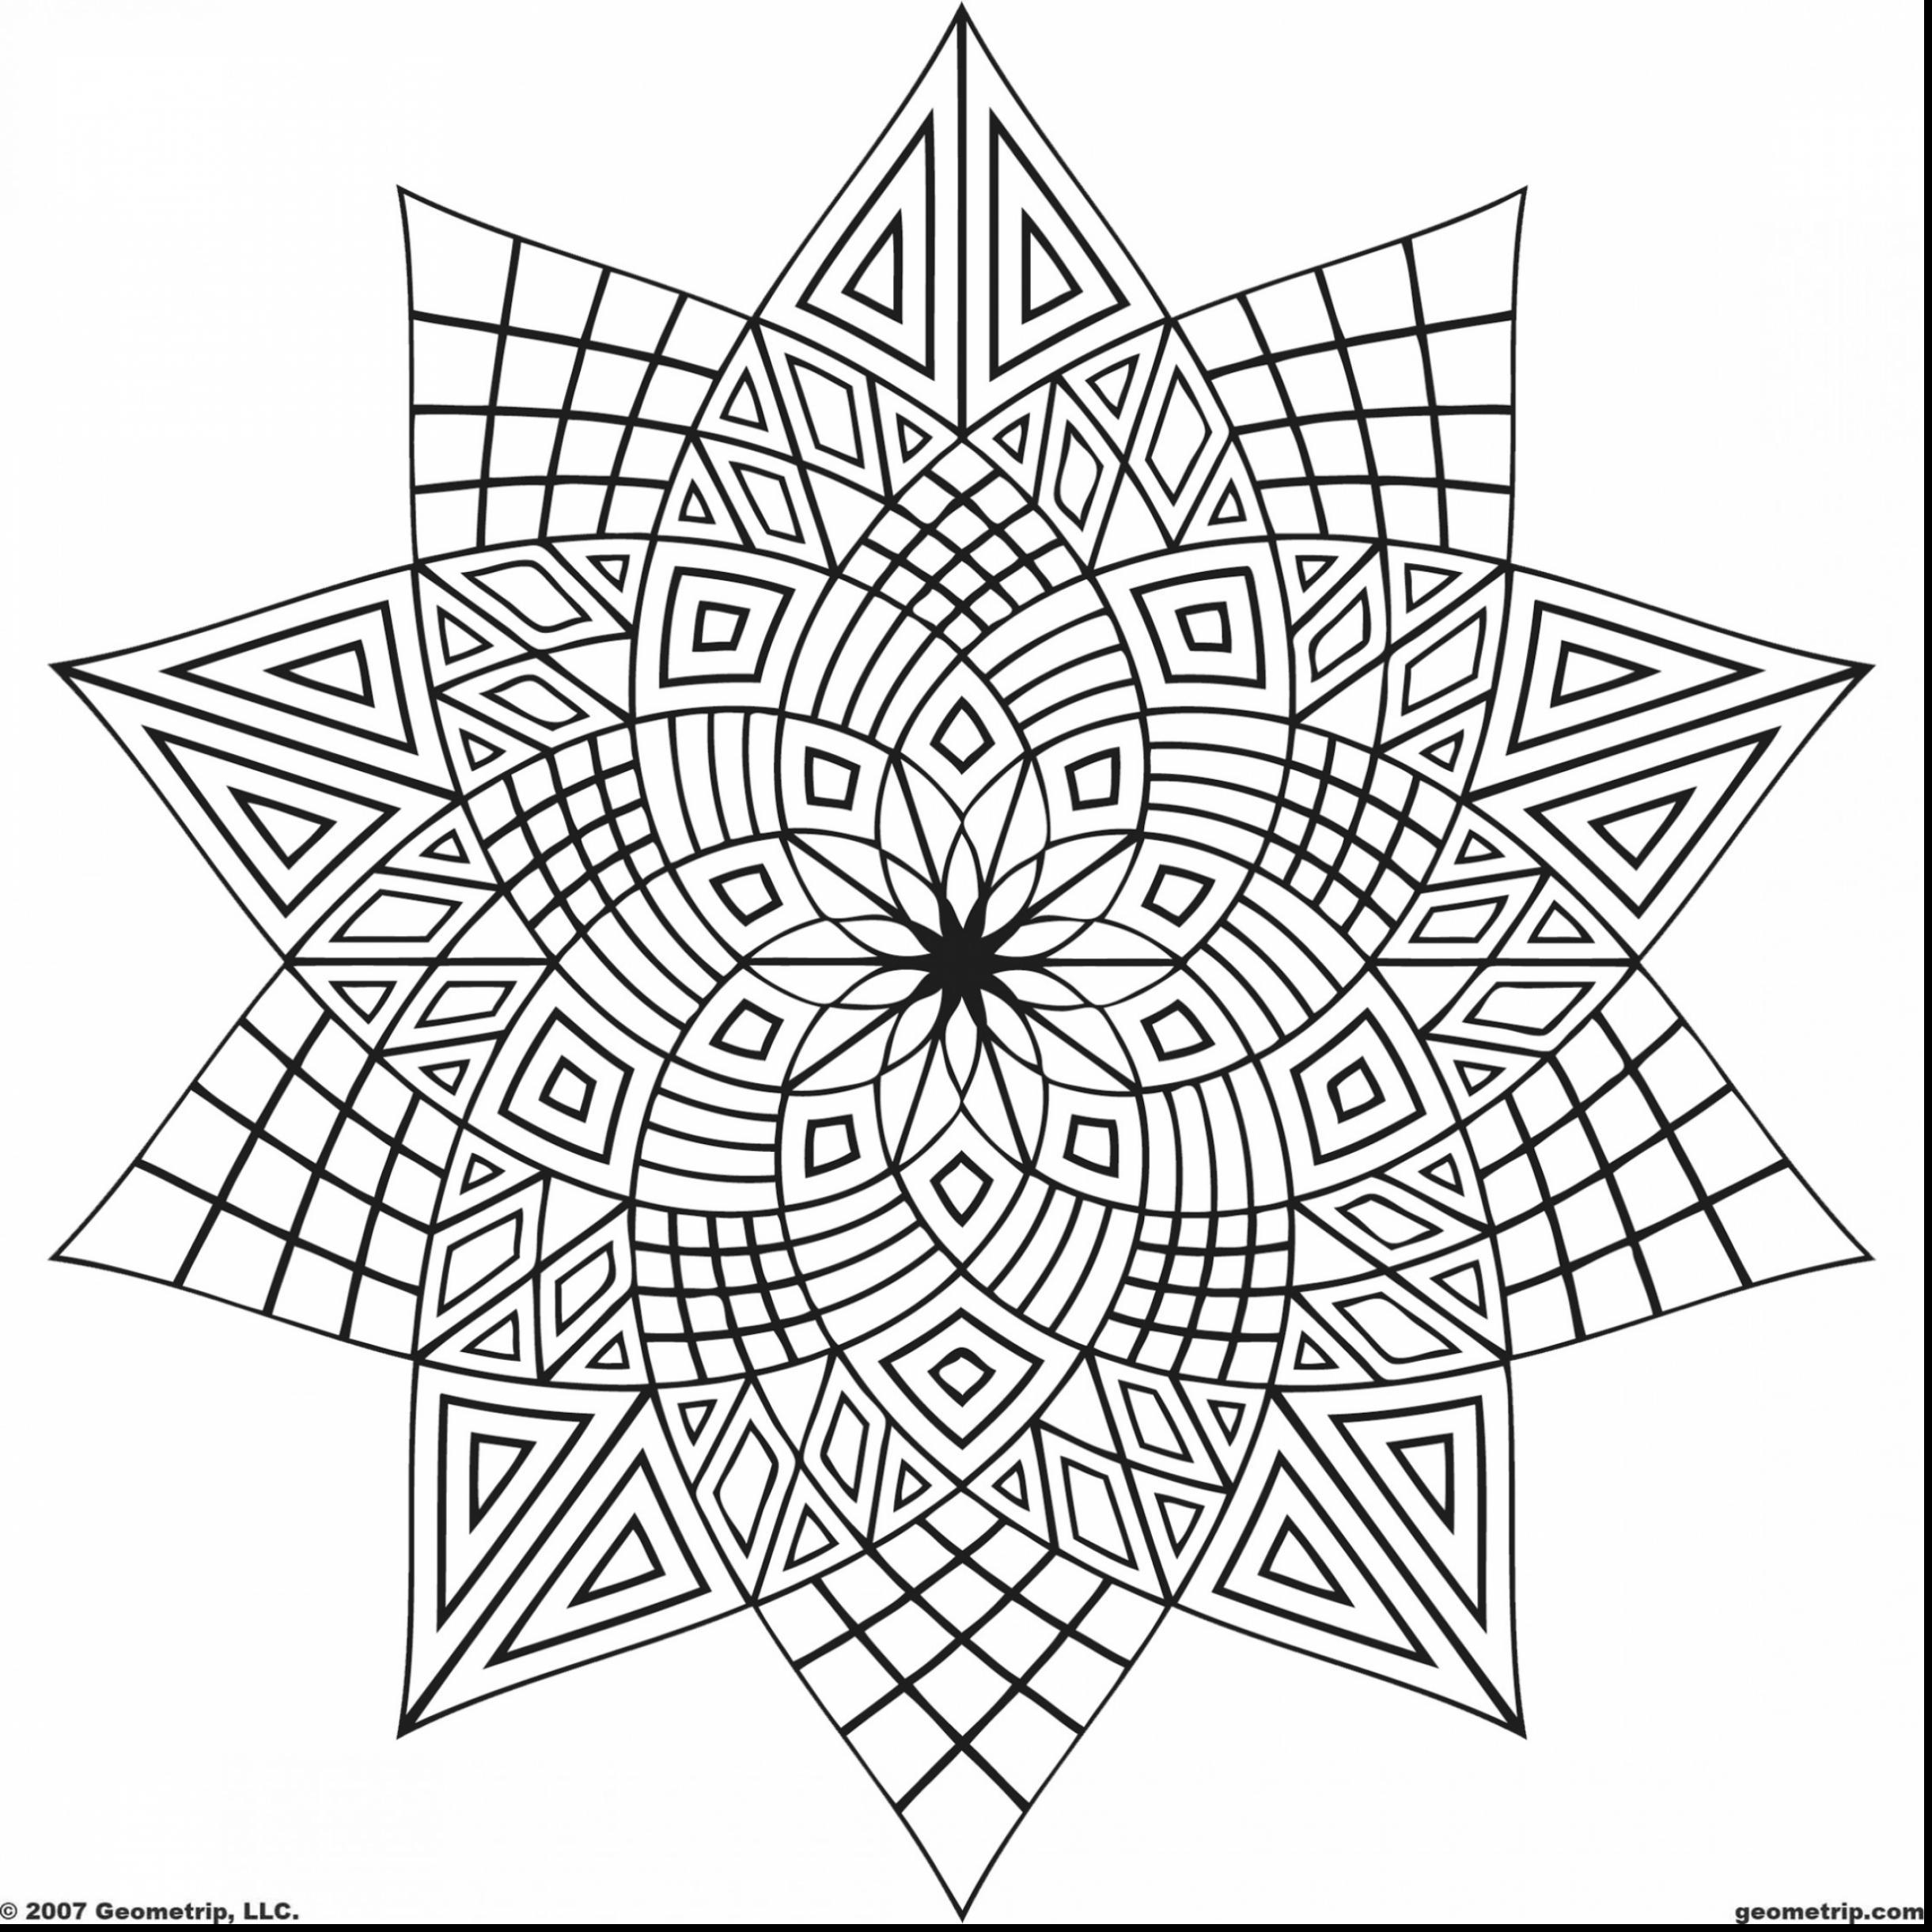 mindfulness-coloring-pages-for-students-free-8-free-printable-mindful